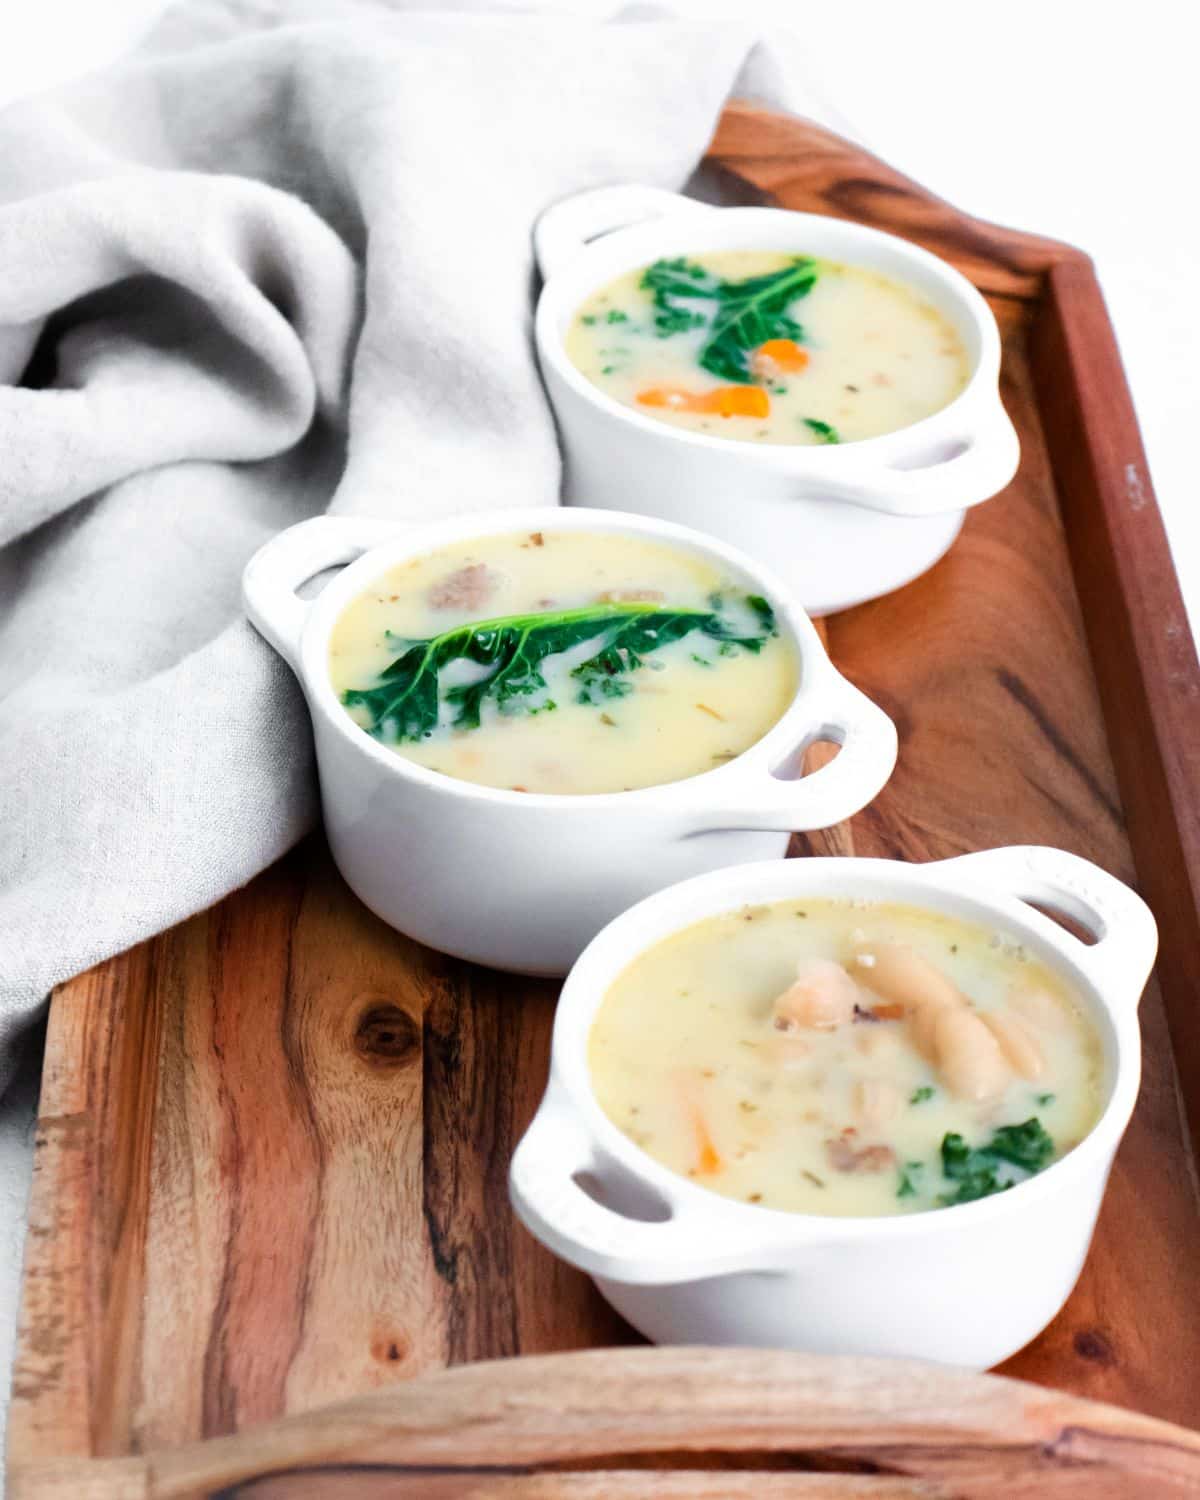 Three bowls of Kale and Sausage soup on a wooden tray.